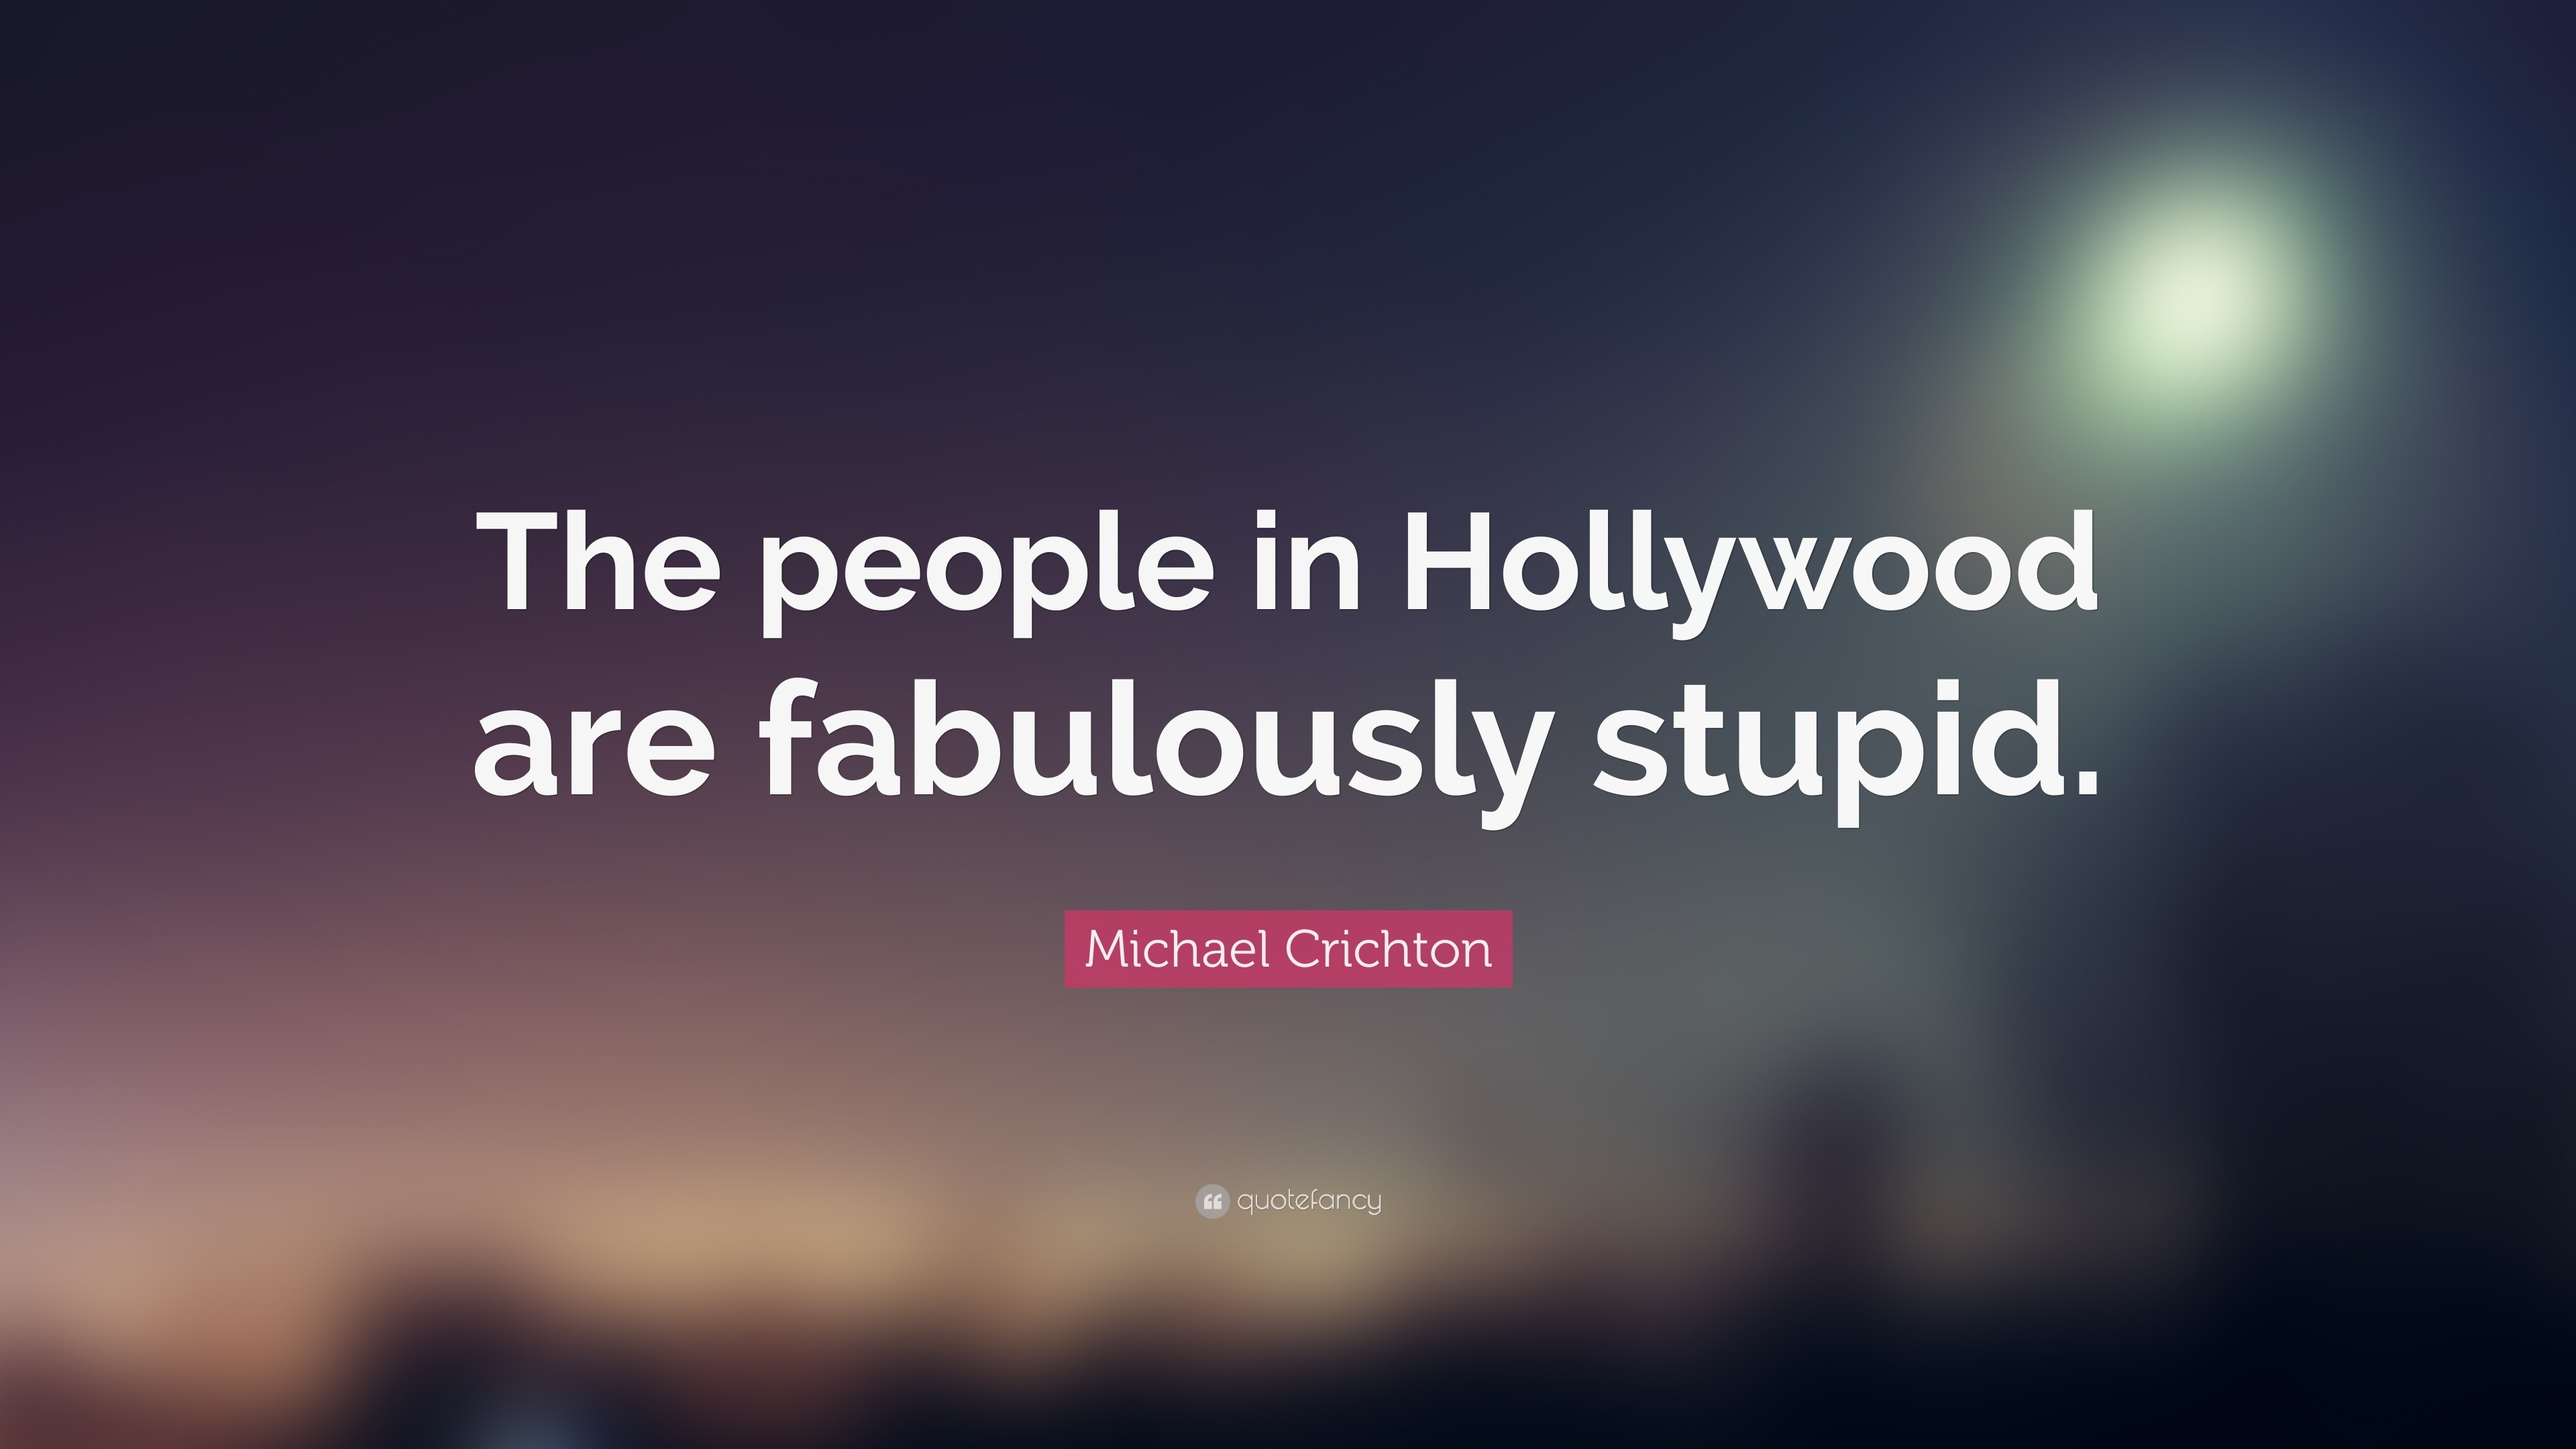 3840x2160 Michael Crichton Quote: “The people in Hollywood are fabulously stupid.”